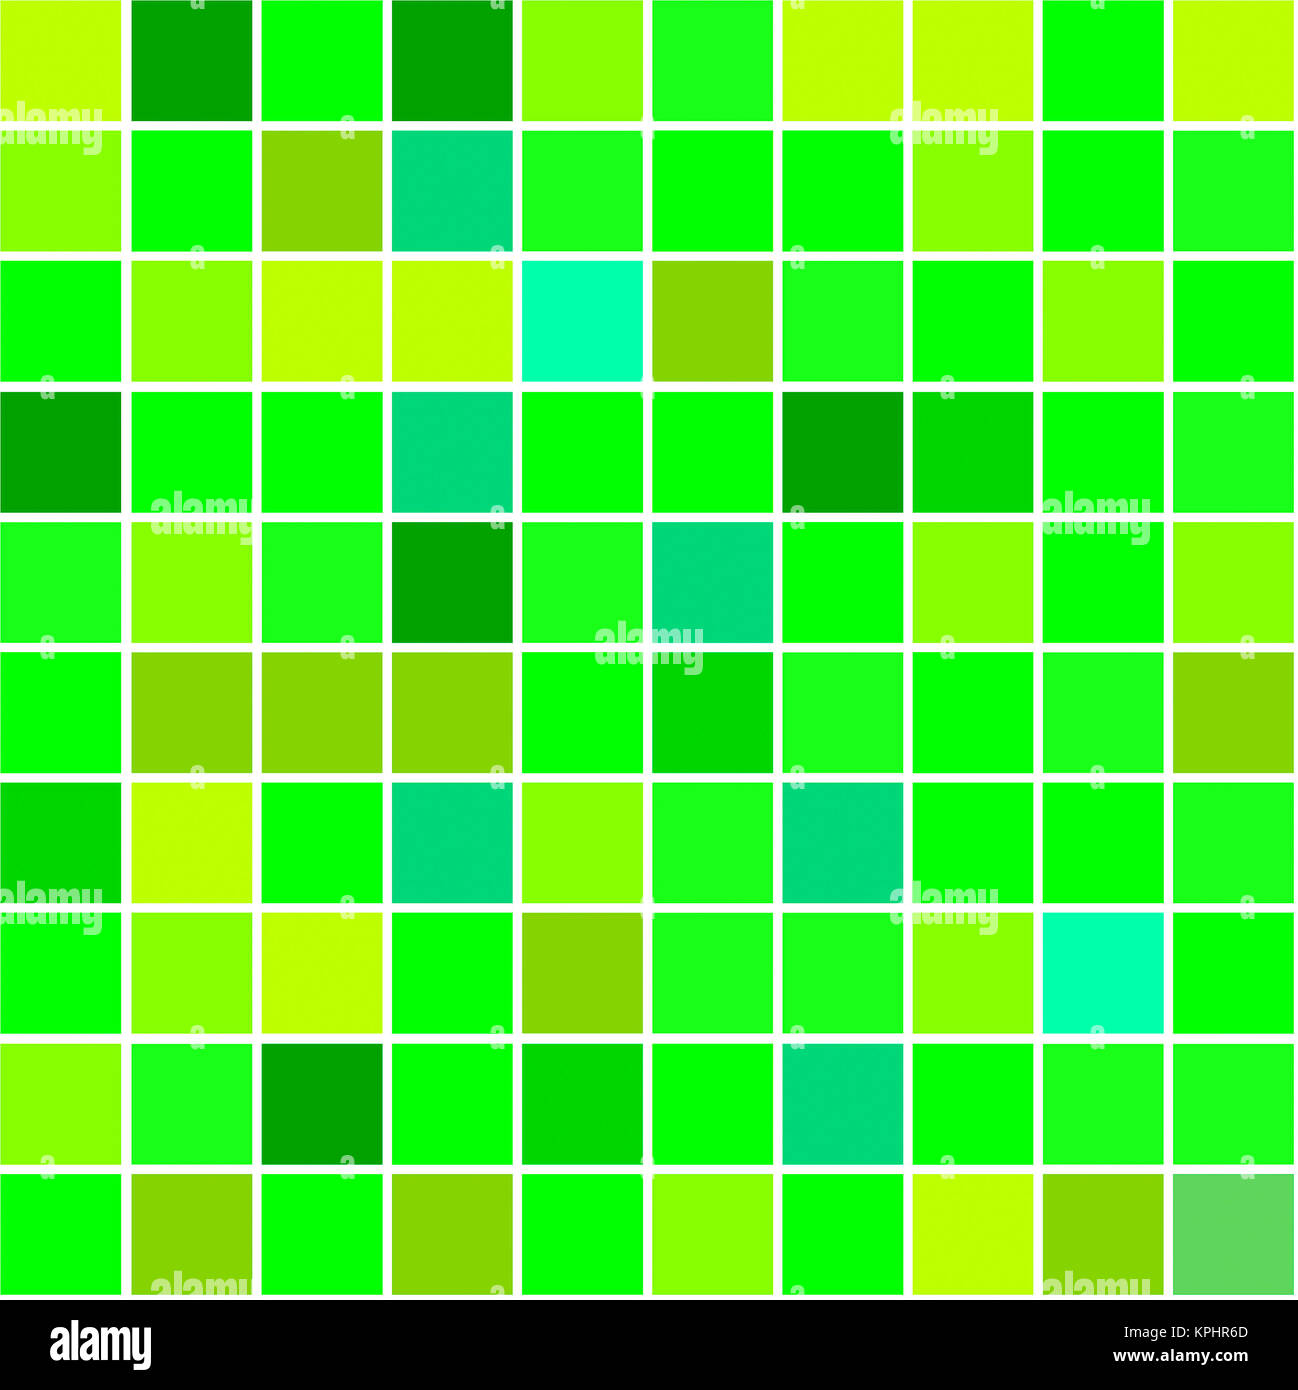 Seamless tiles background different shades of green colour Stock